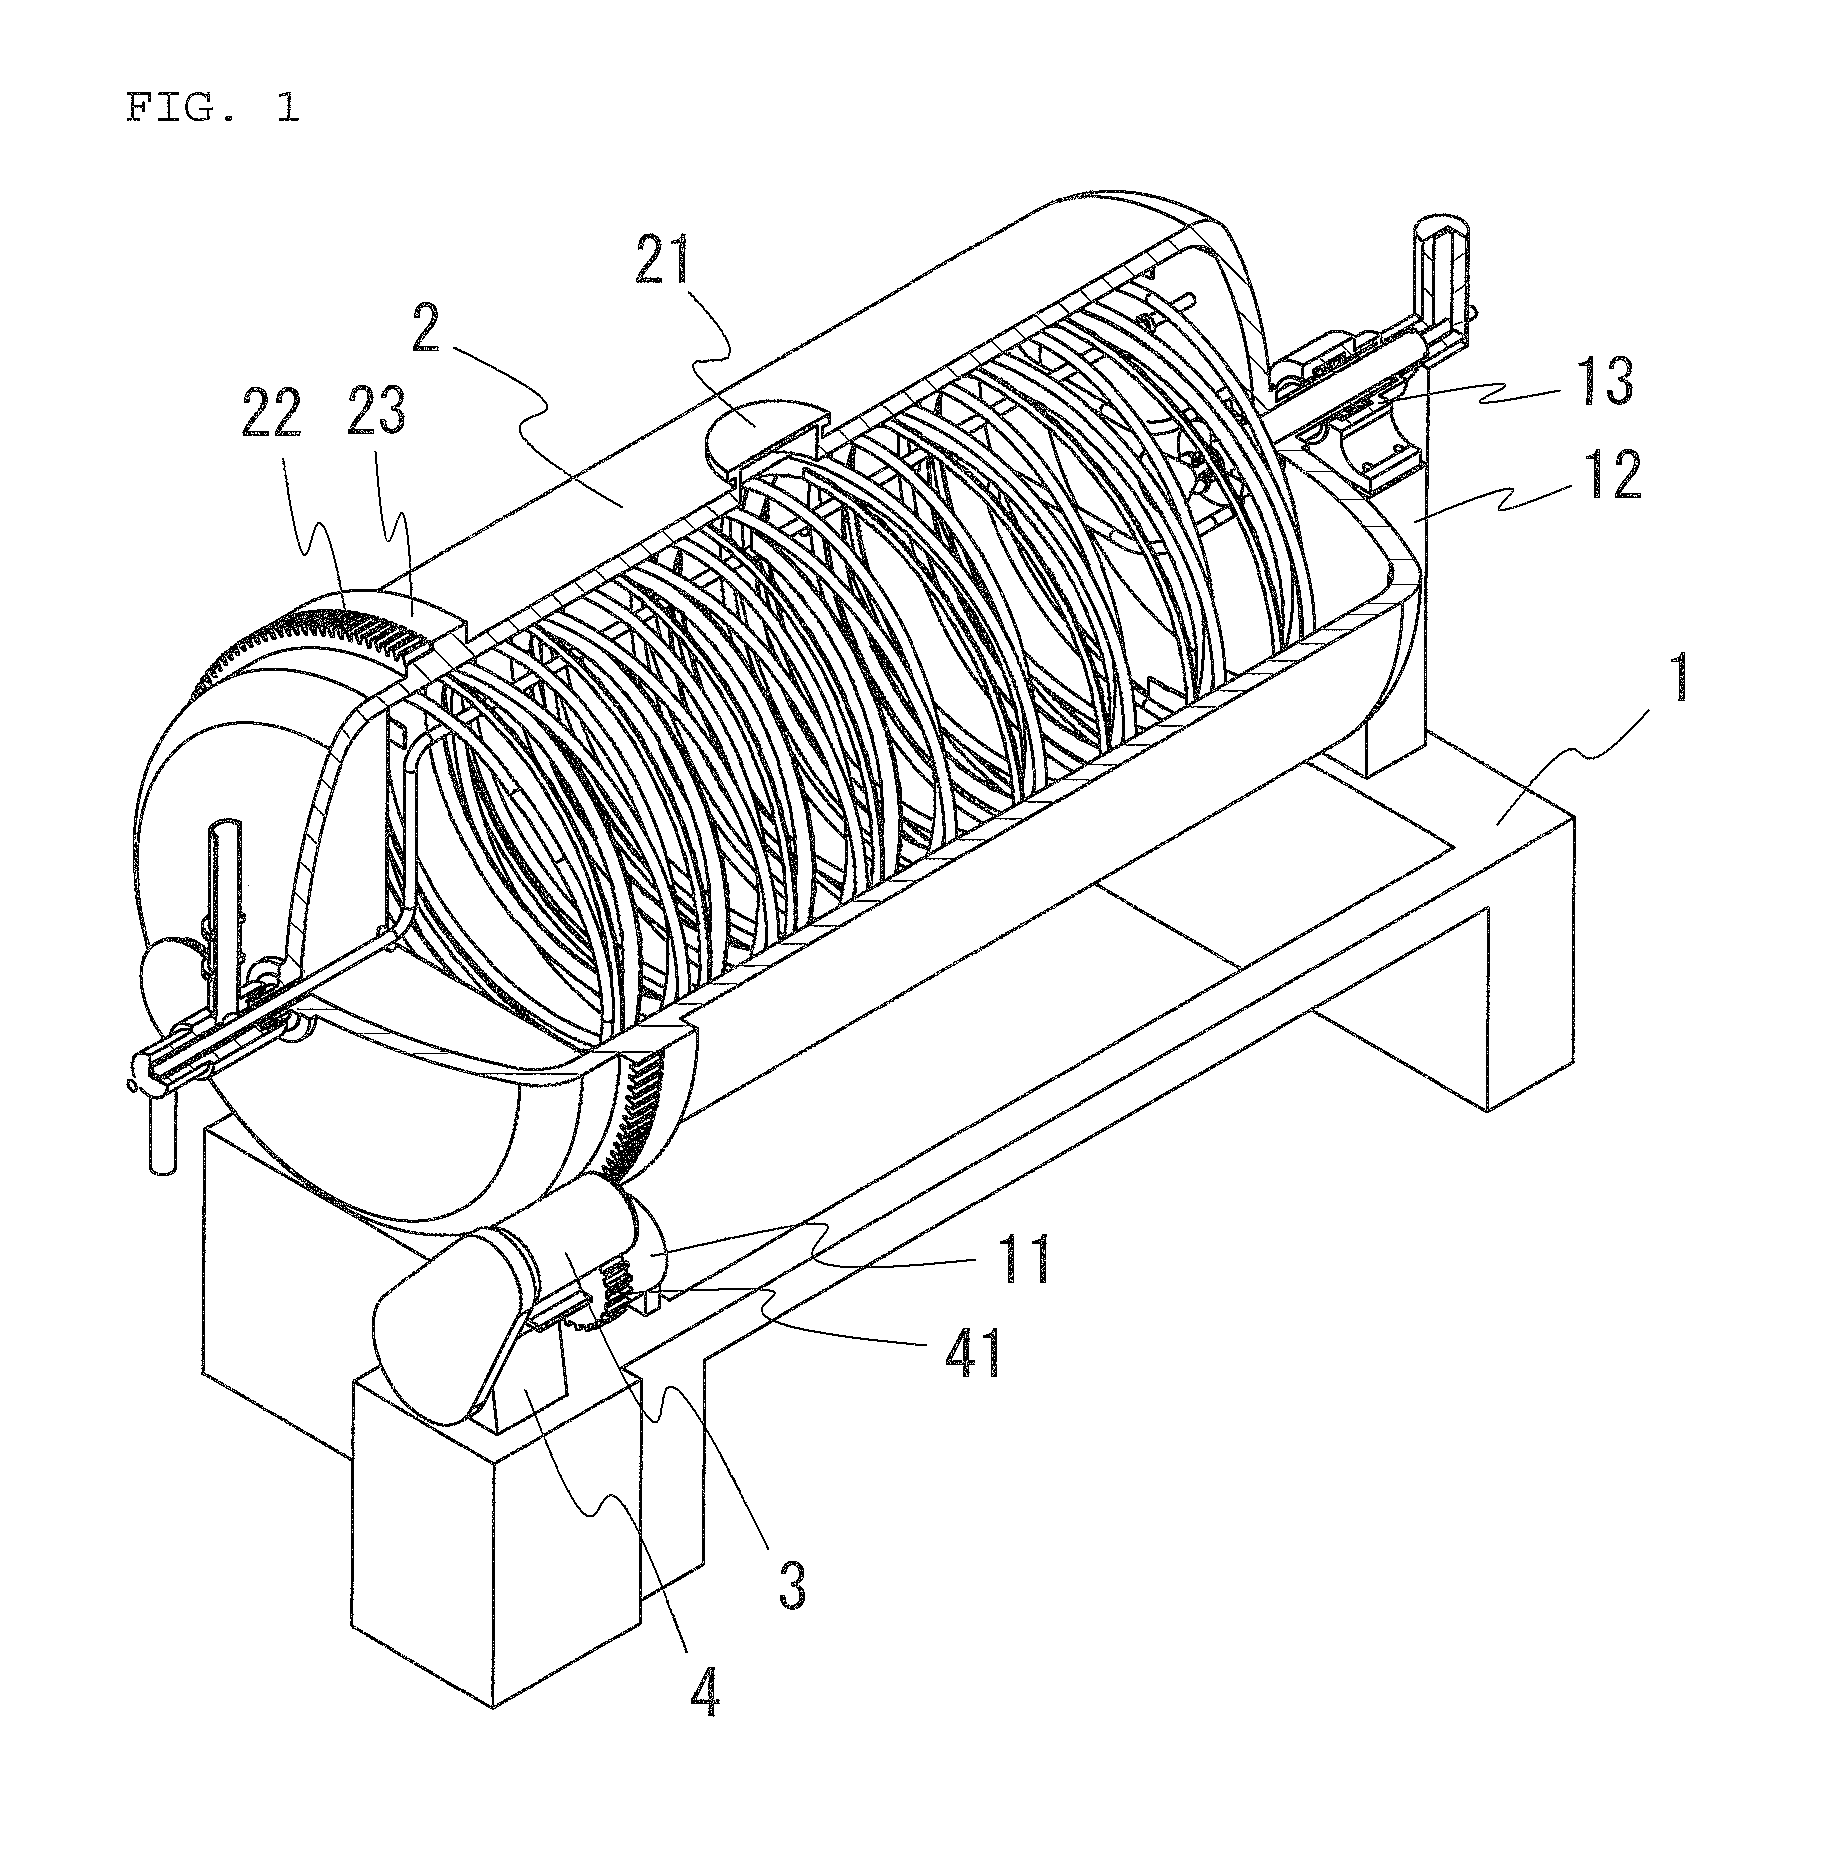 Apparatus for producing parboiled rice